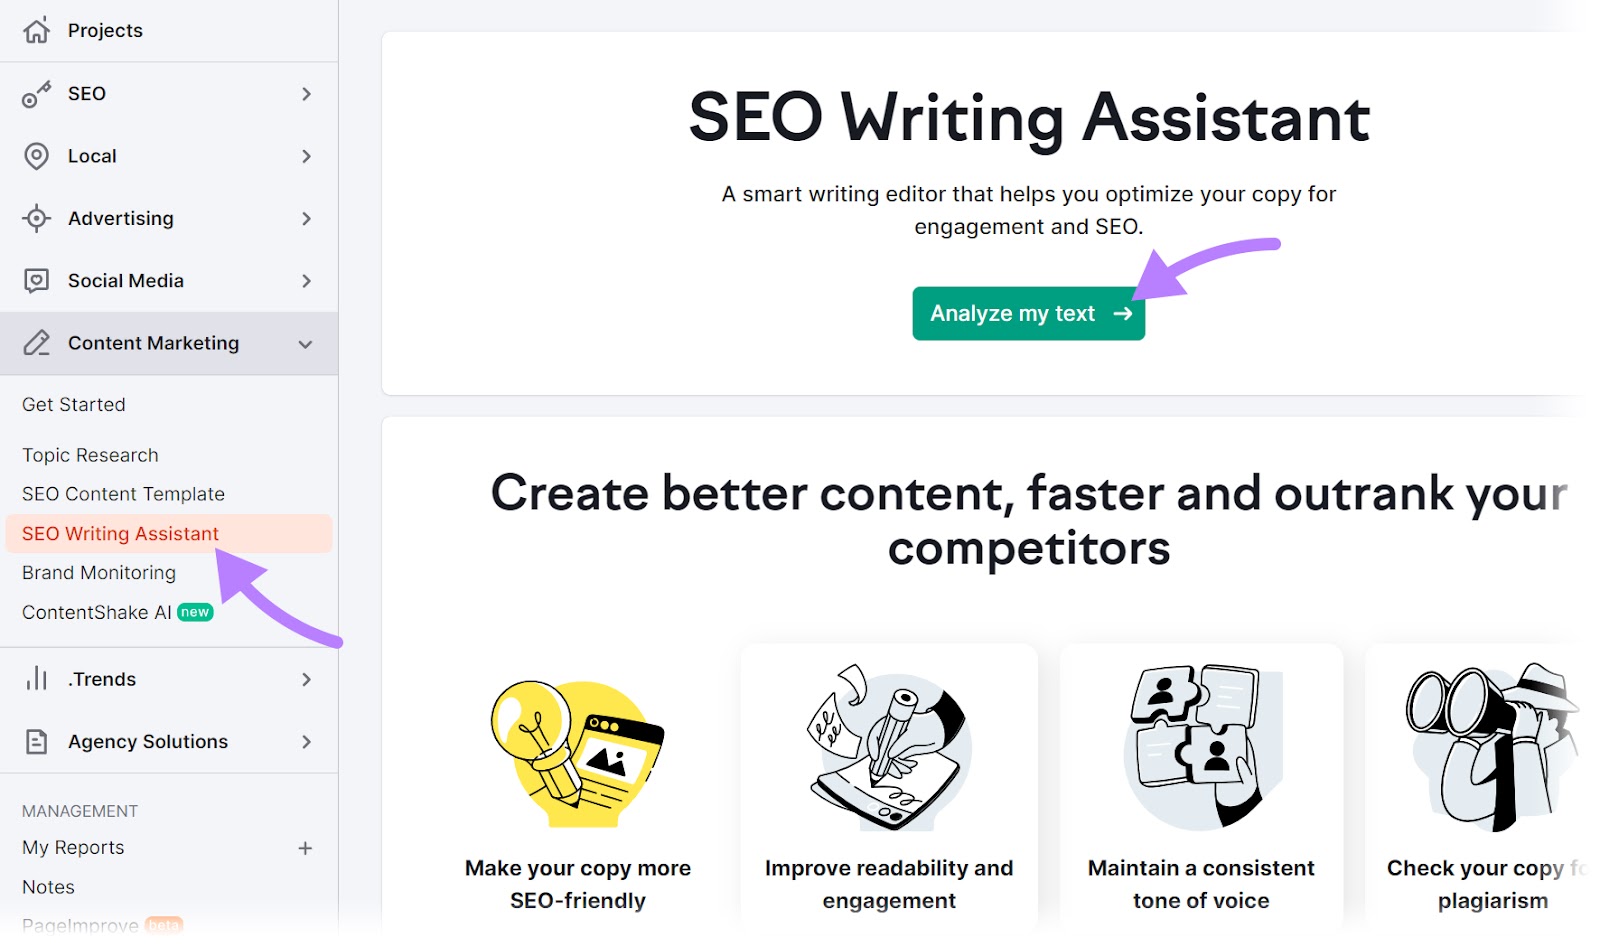 Navigating to SEO Writing Assistant tool